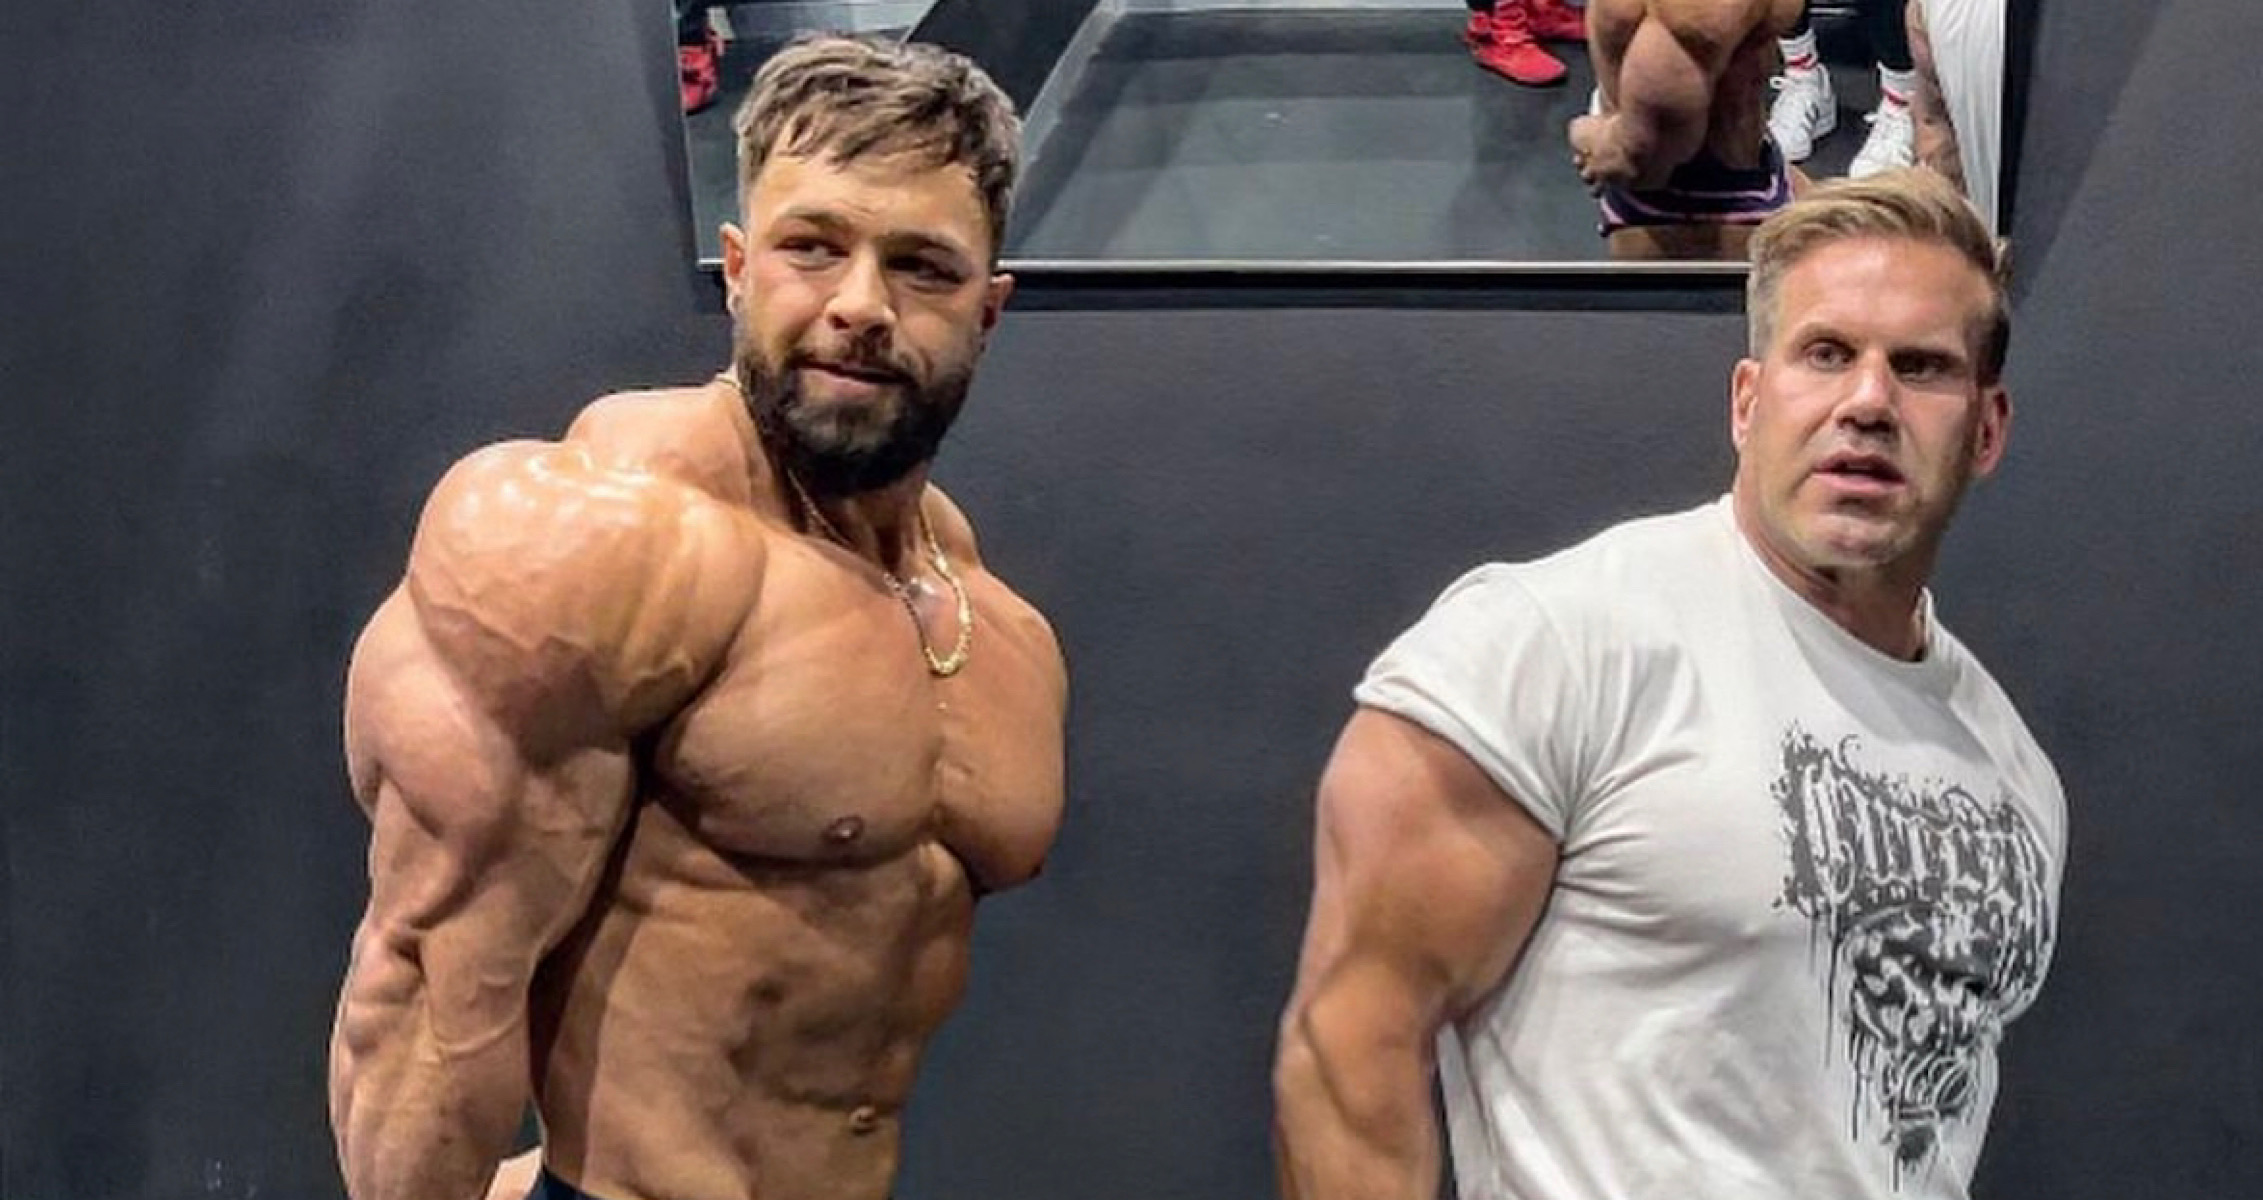 Regan Grimes Gets High Level Posing Advice From Jay Cutler and Iris Kyle